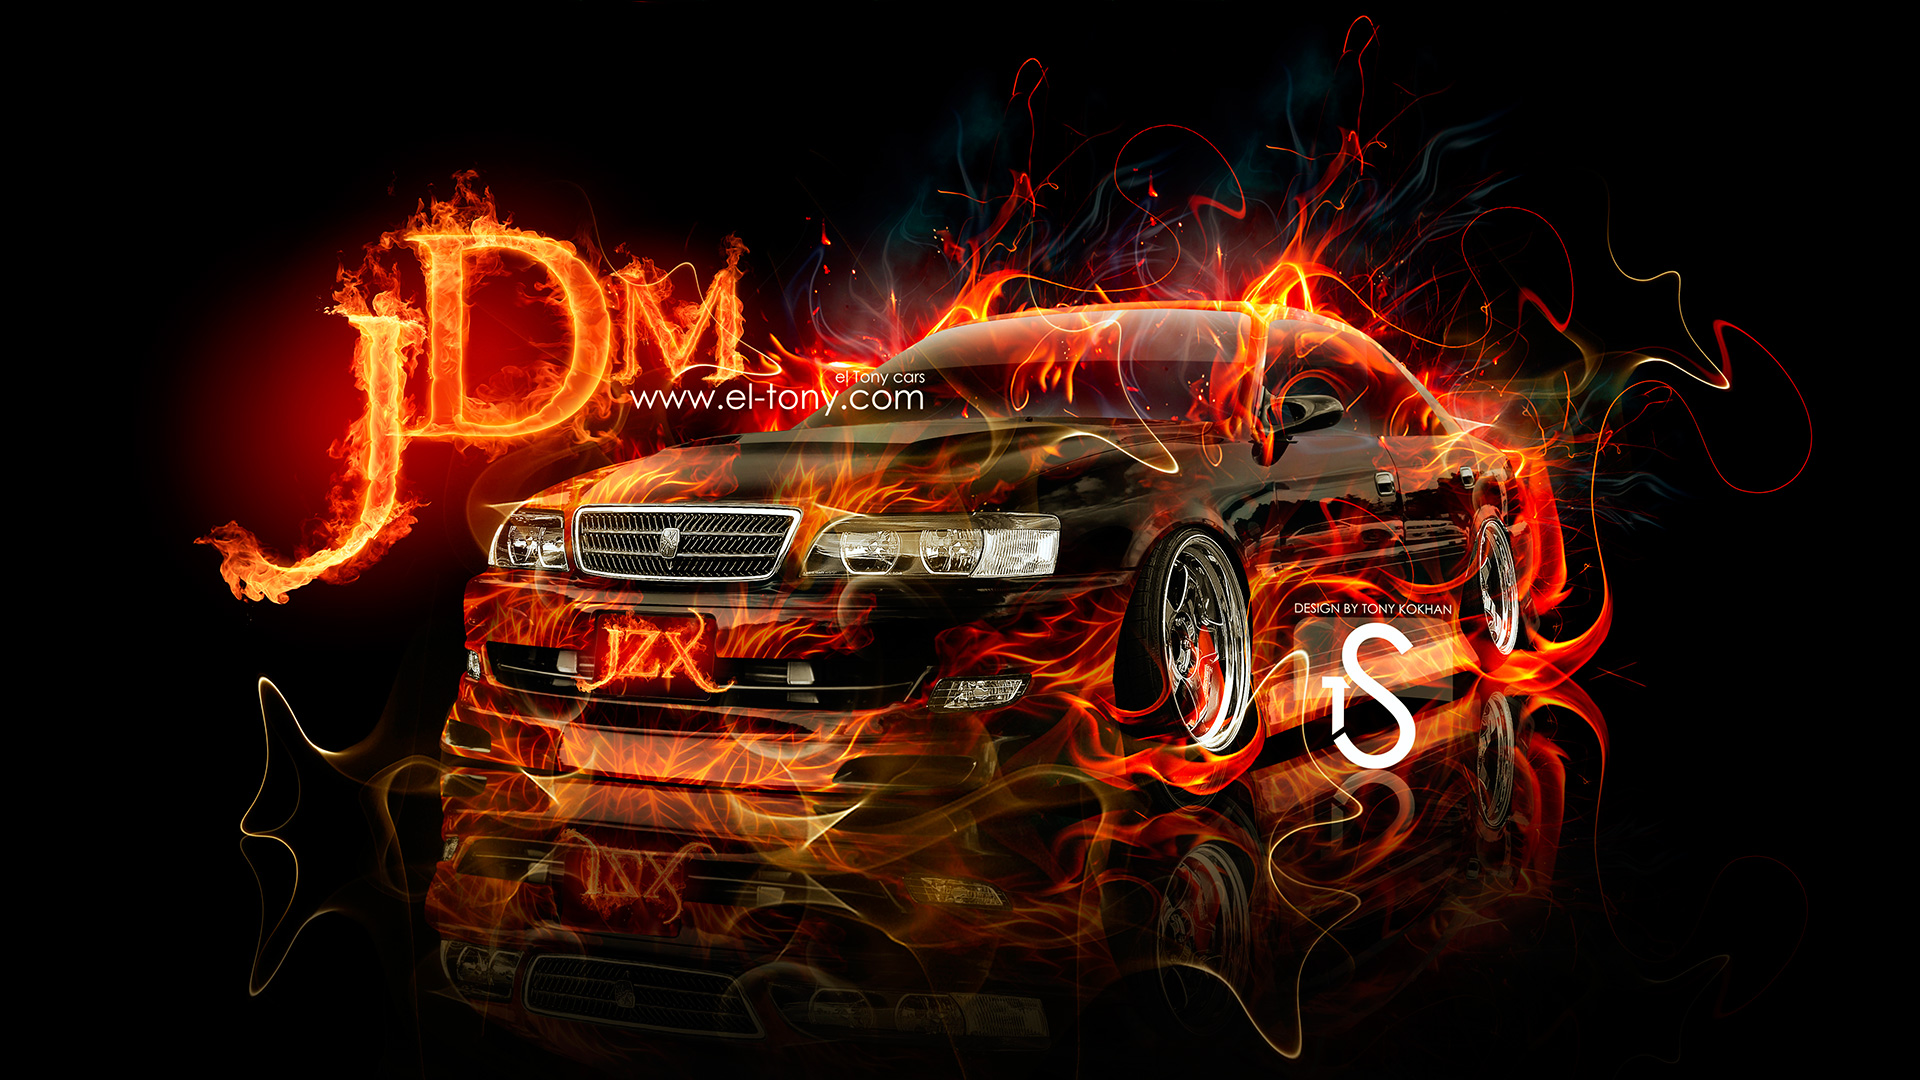 Toyota Chaser Jzx100 Jdm Fire Car Front HD Wallpaper By Tony